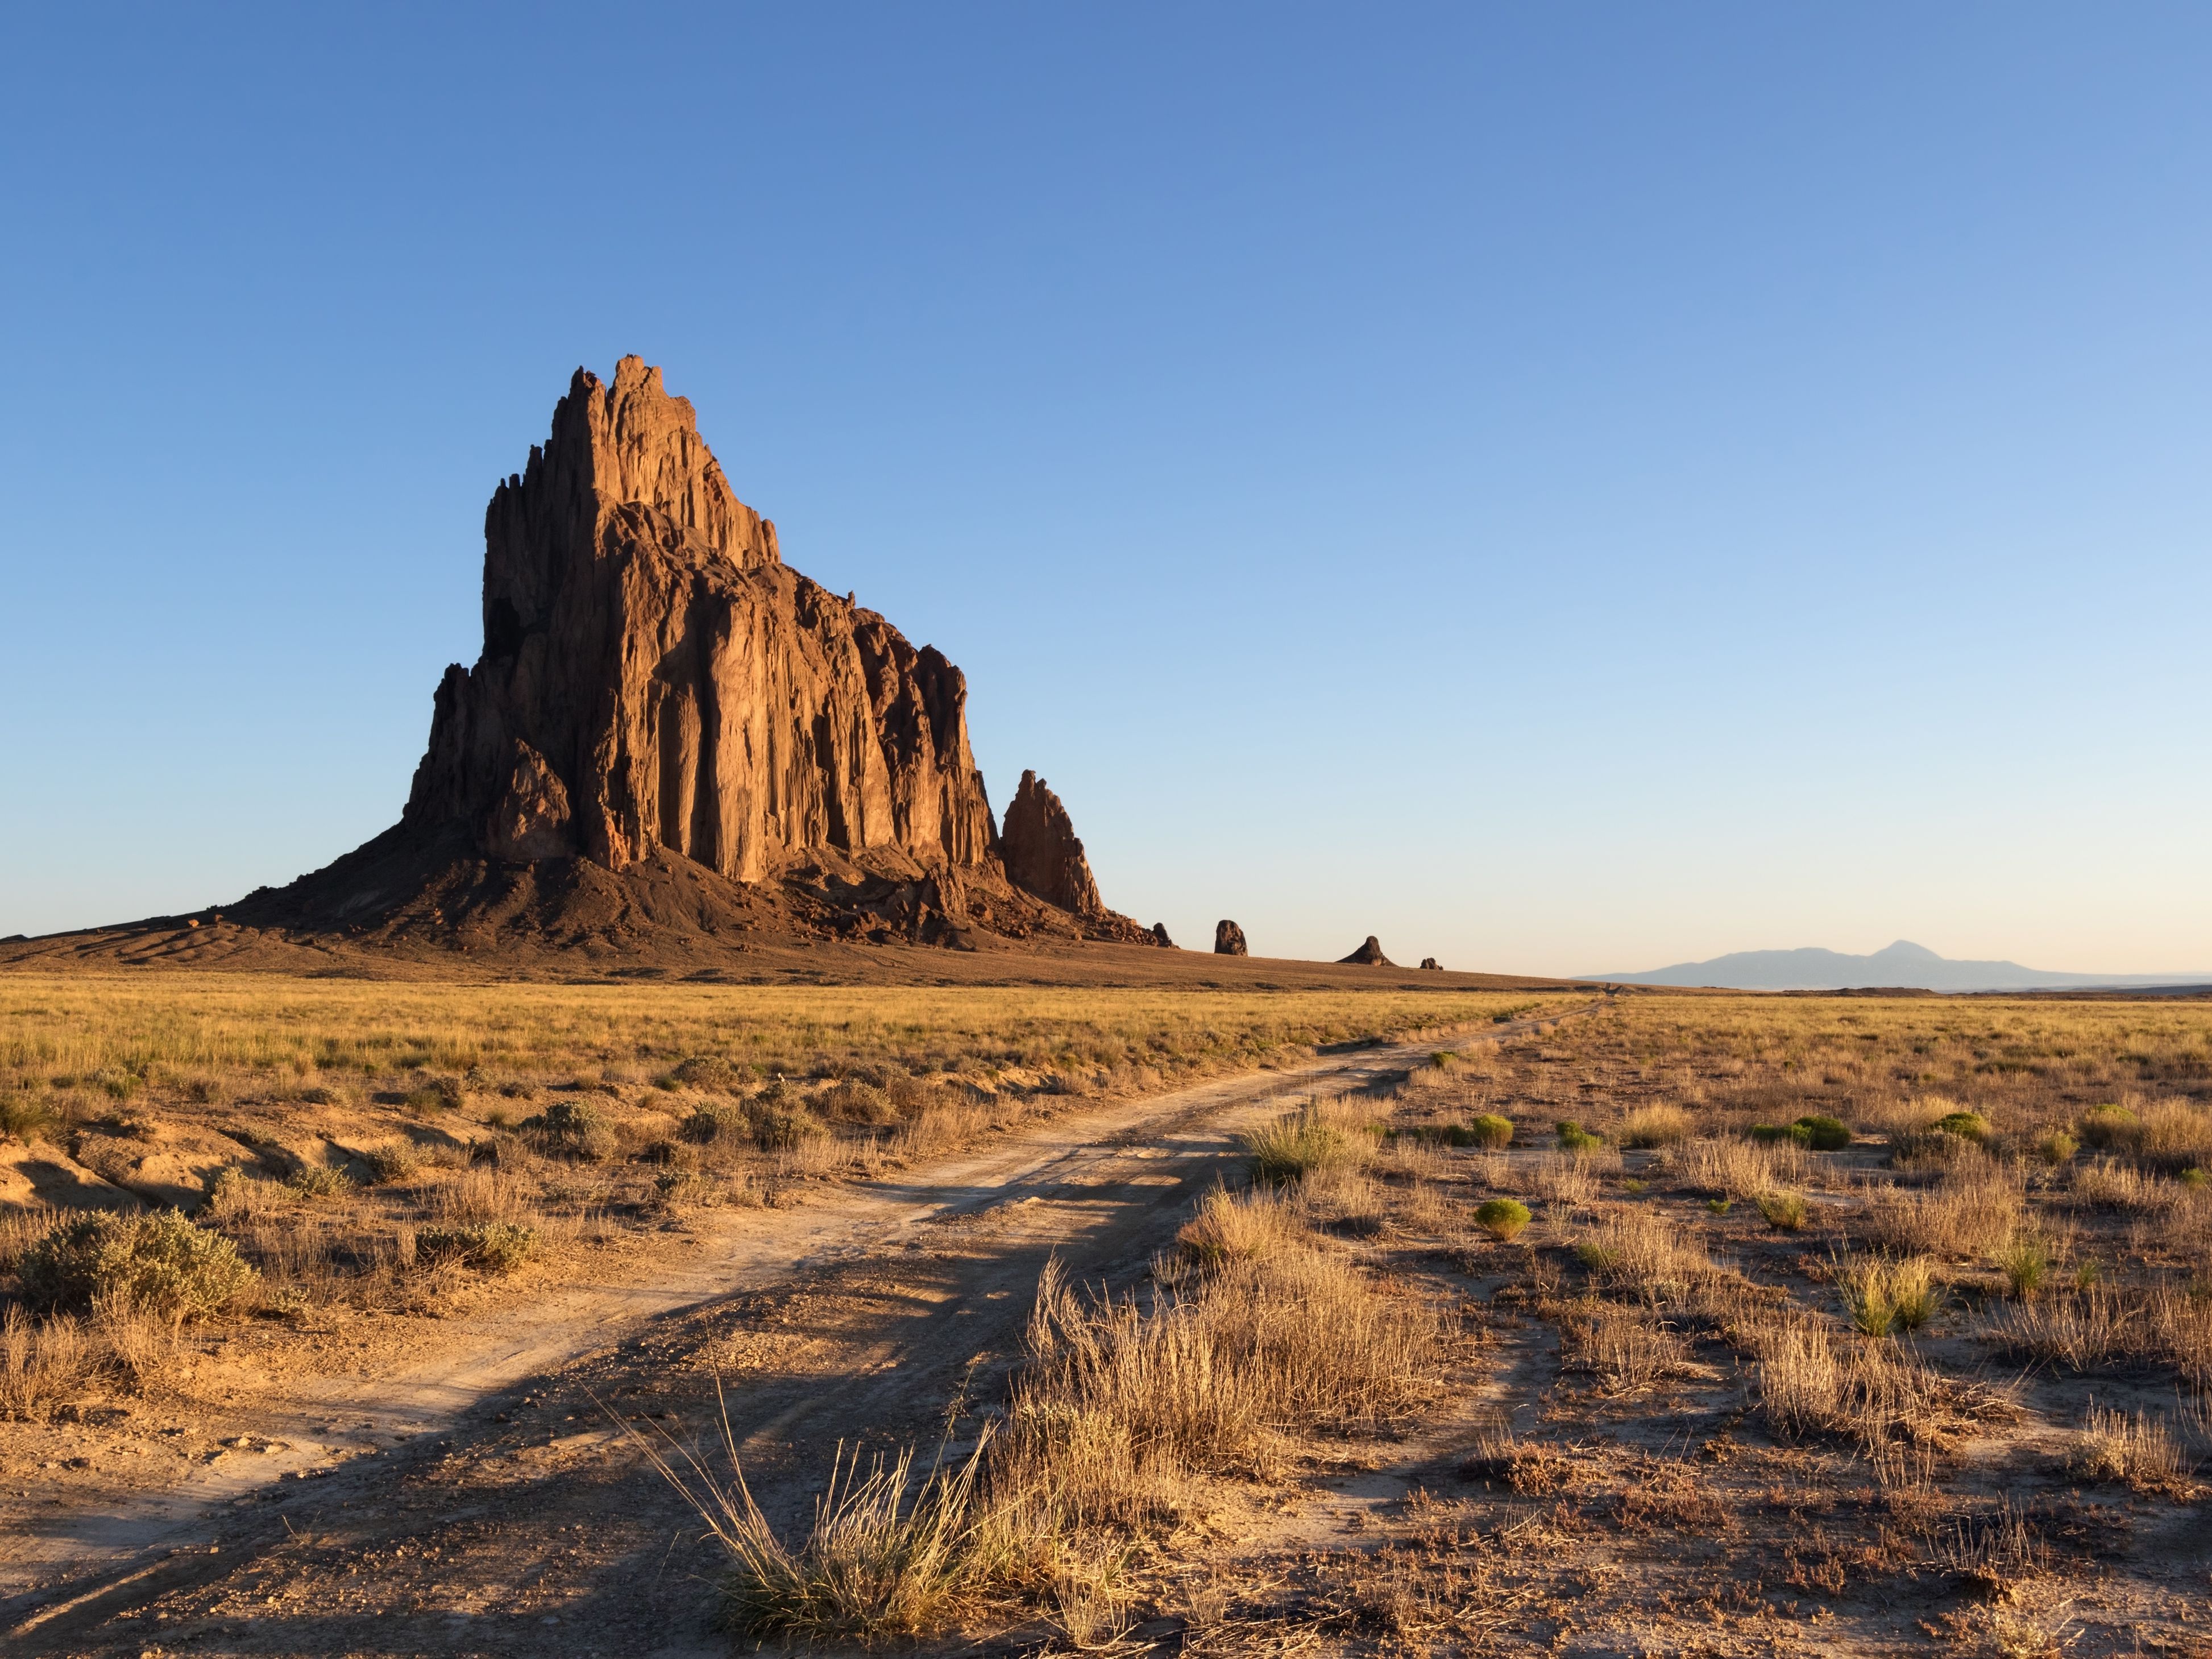 Facts About Ship Rock, the Navajo's Sacred Peak